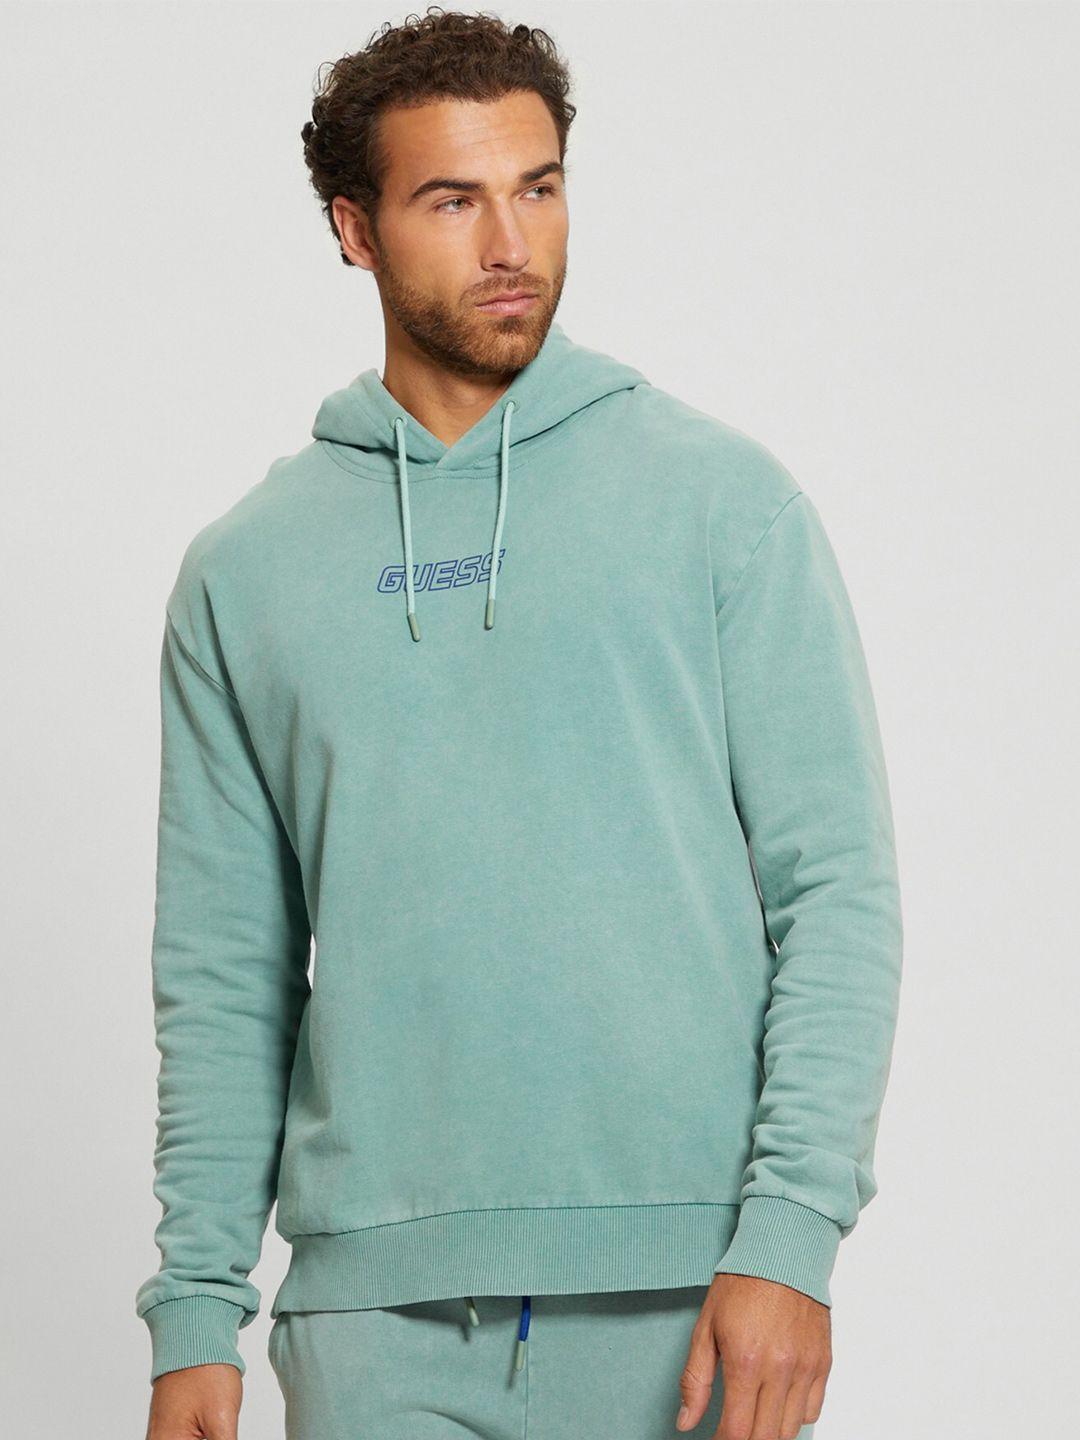 guess hooded pure cotton pullover sweatshirt